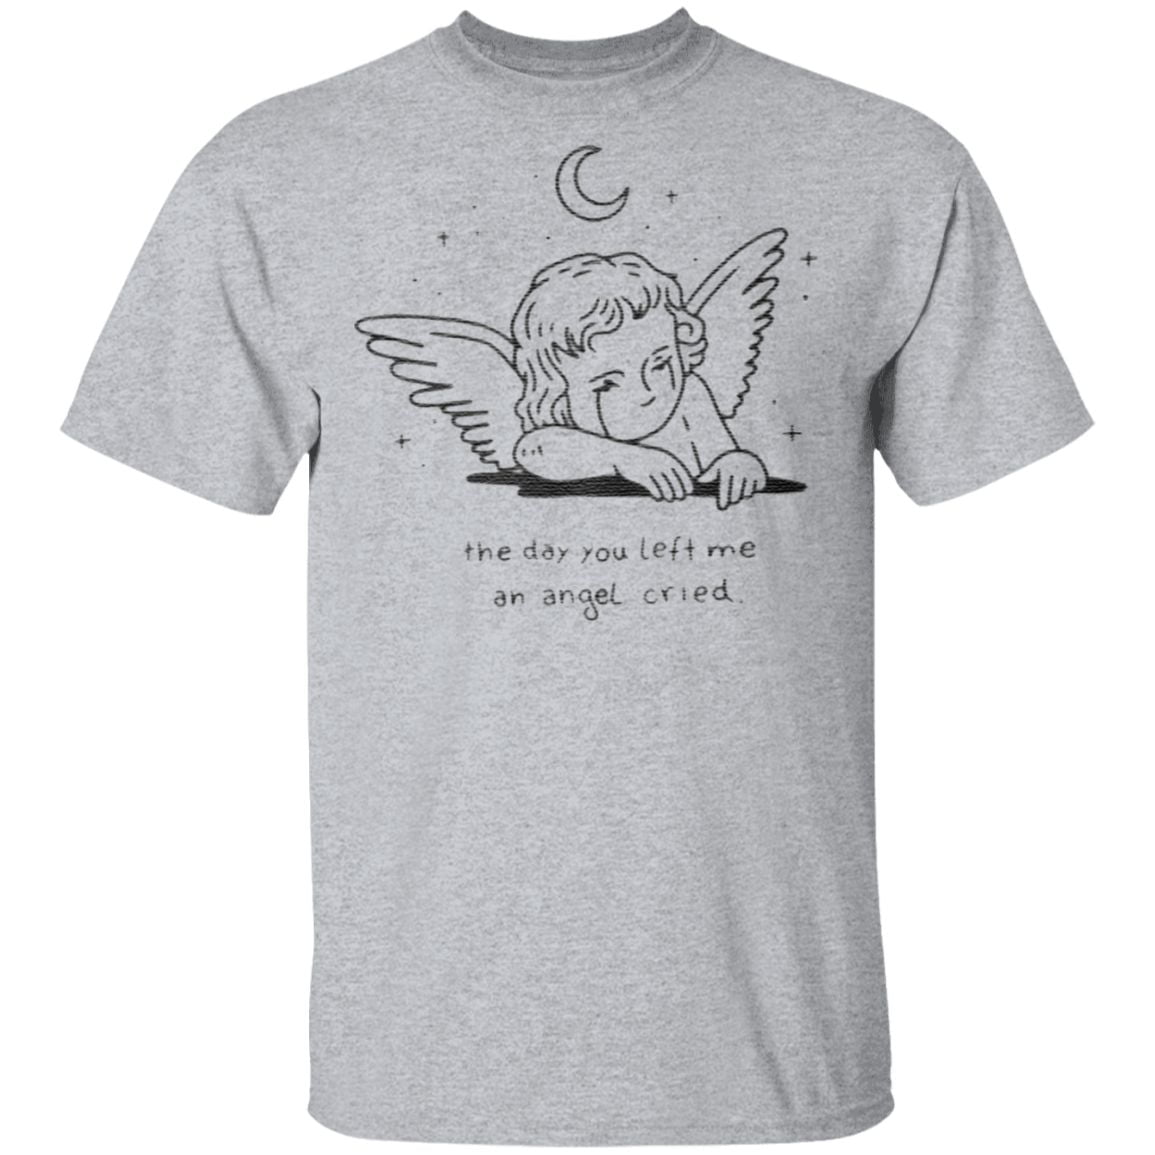 The day you left me an angel cried t shirt